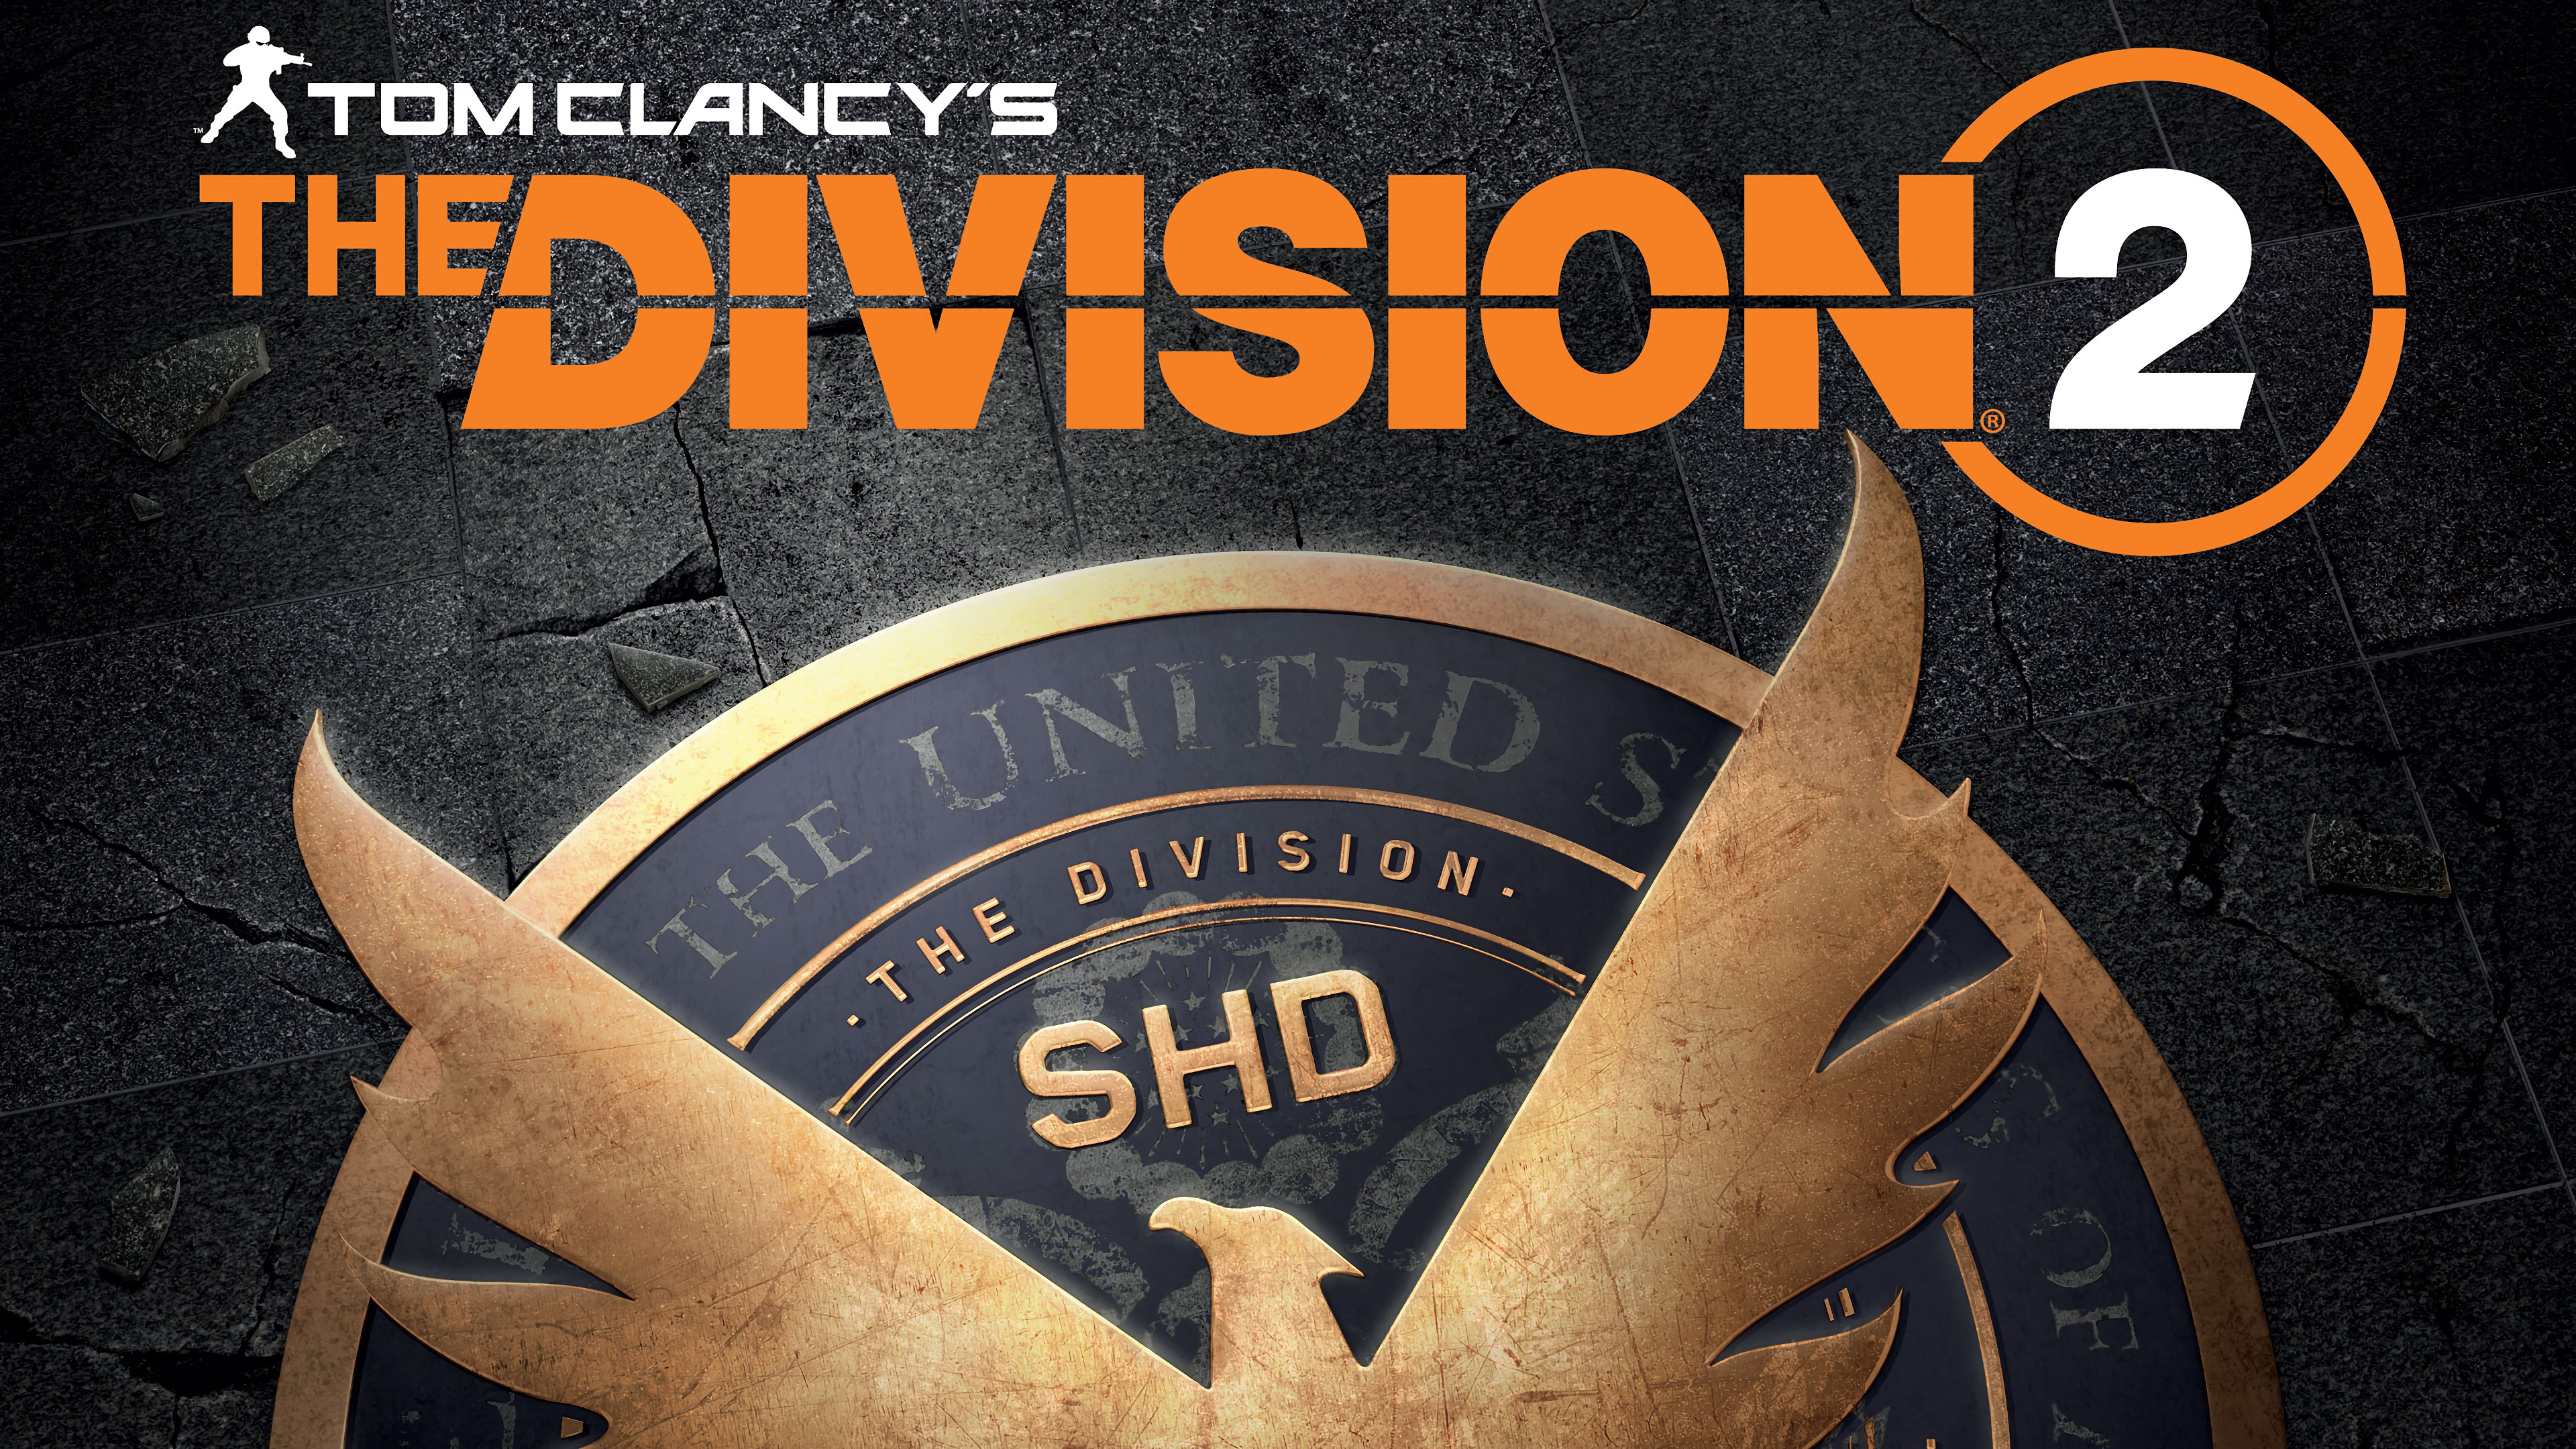 video game, tom clancy's the division 2